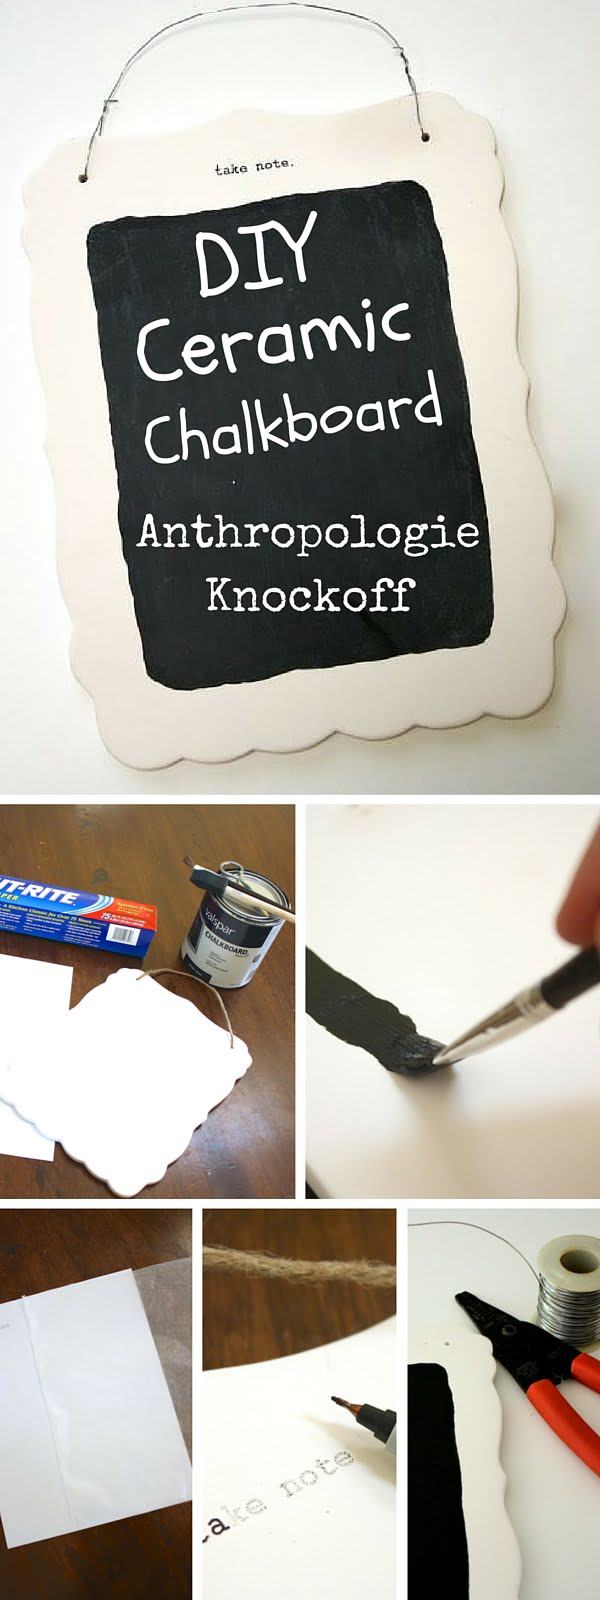 Check out the tutorial:  Anthropologie Ceramic Chalkboard Knockoff  